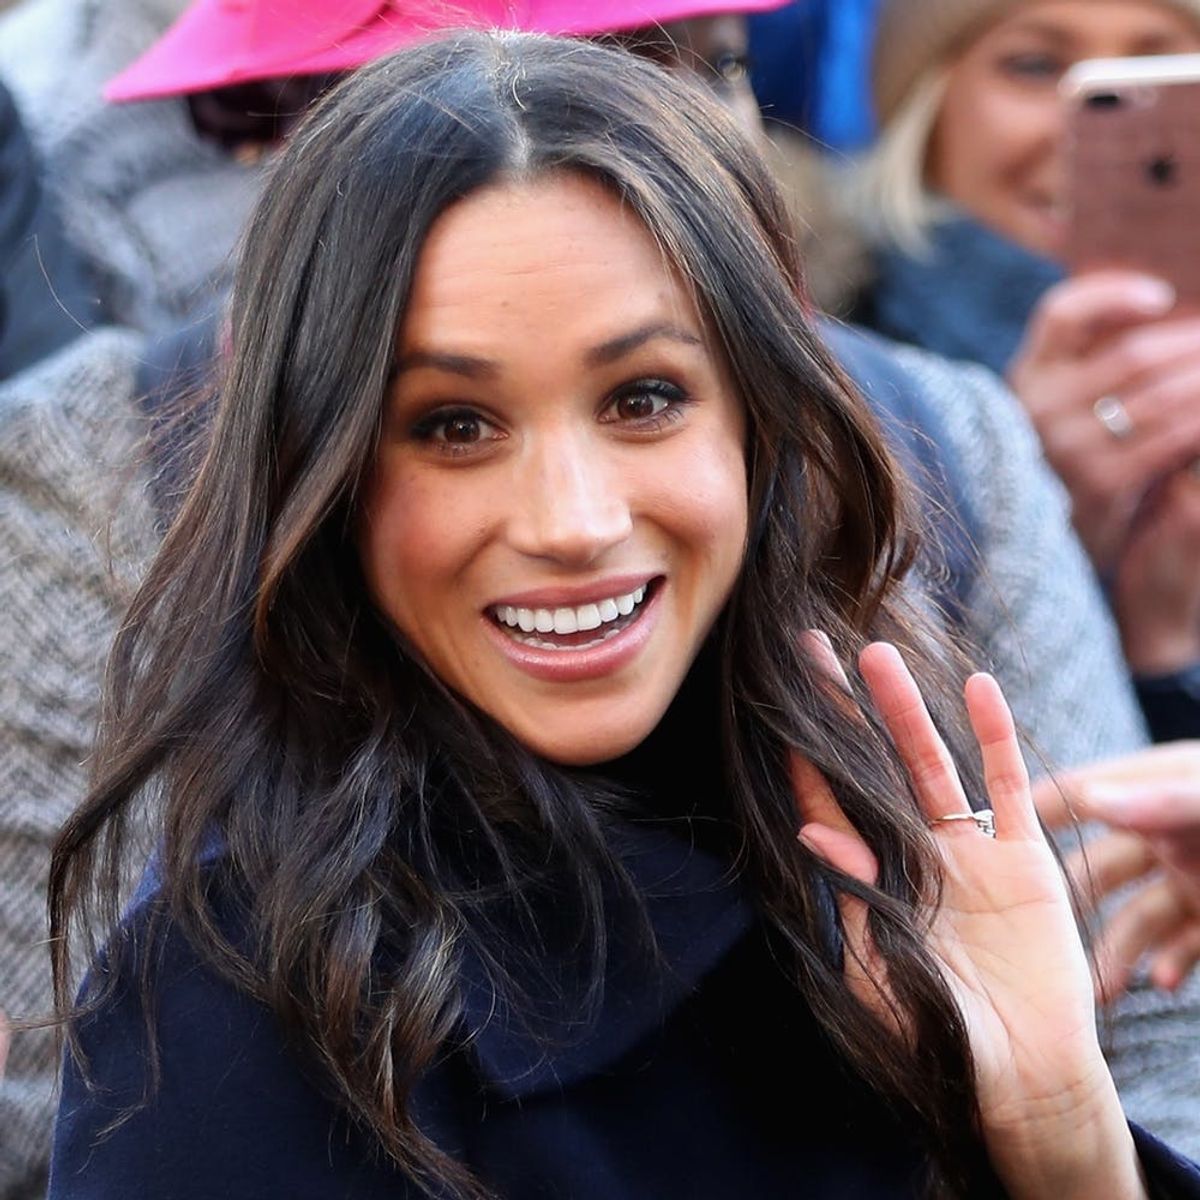 Sorry, But You Won’t Be Able to Get a Replica of Meghan Markle’s Ring